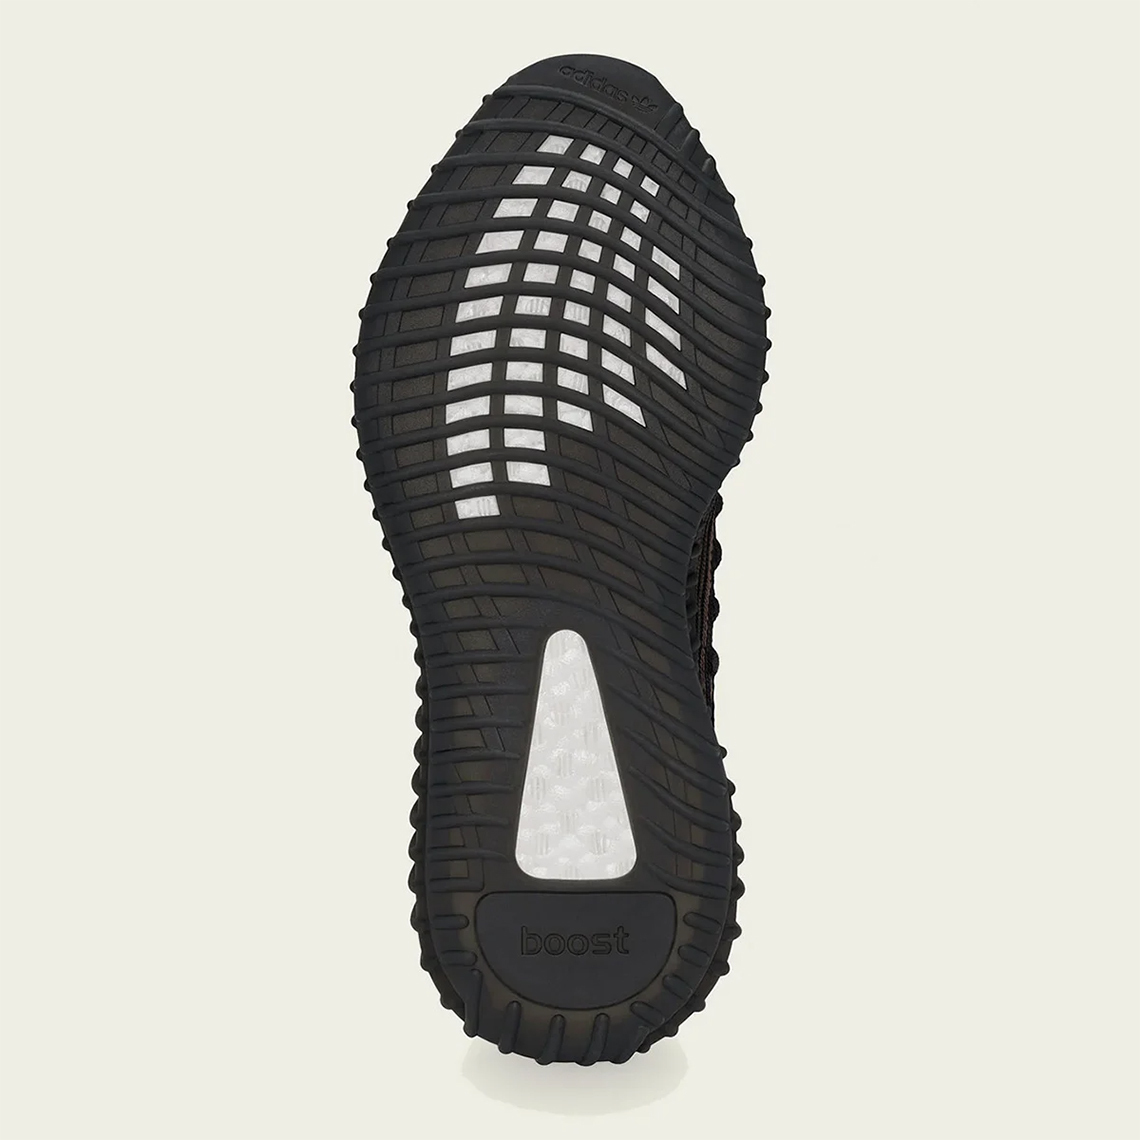 adidas Yeezy Boost 350 v2 CMPCT 'Slate Carbon' HQ6319 Release Date GN9012